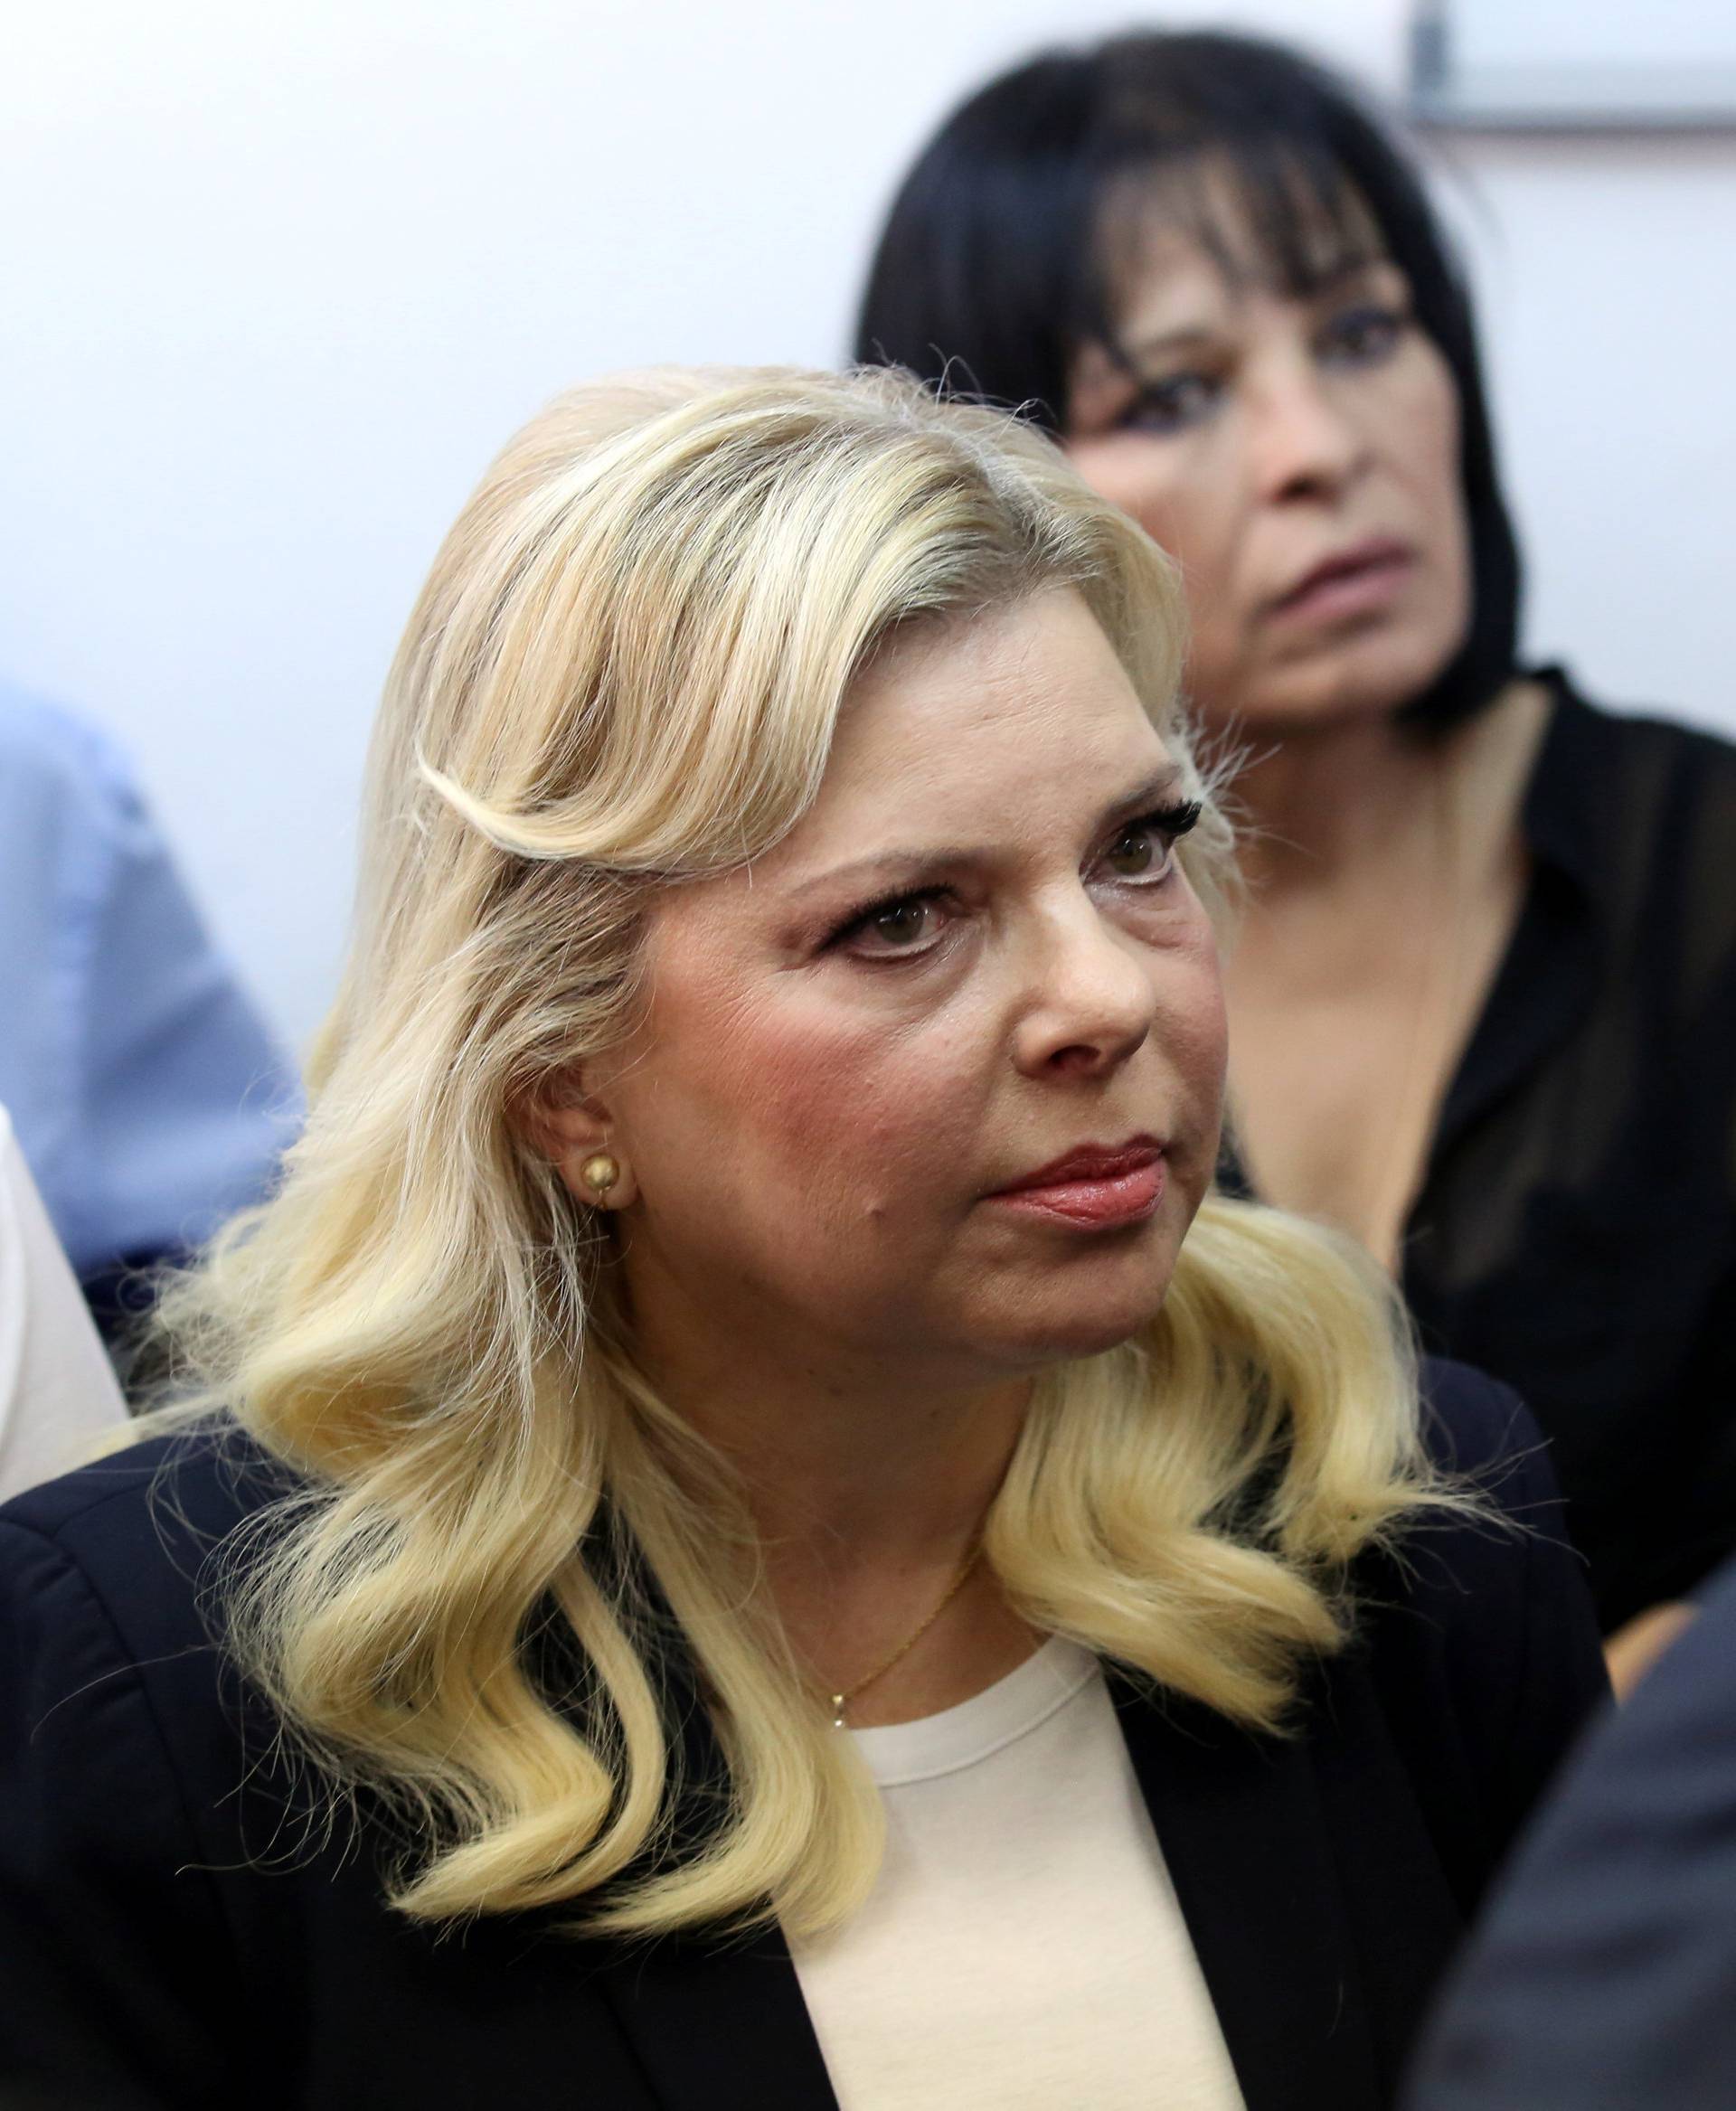 Sara, wife of Israeli Prime Minister Benjamin Netanyahu, appears at a court hearing in the fraud trial against her, at the Magistrate court in Jerusalem